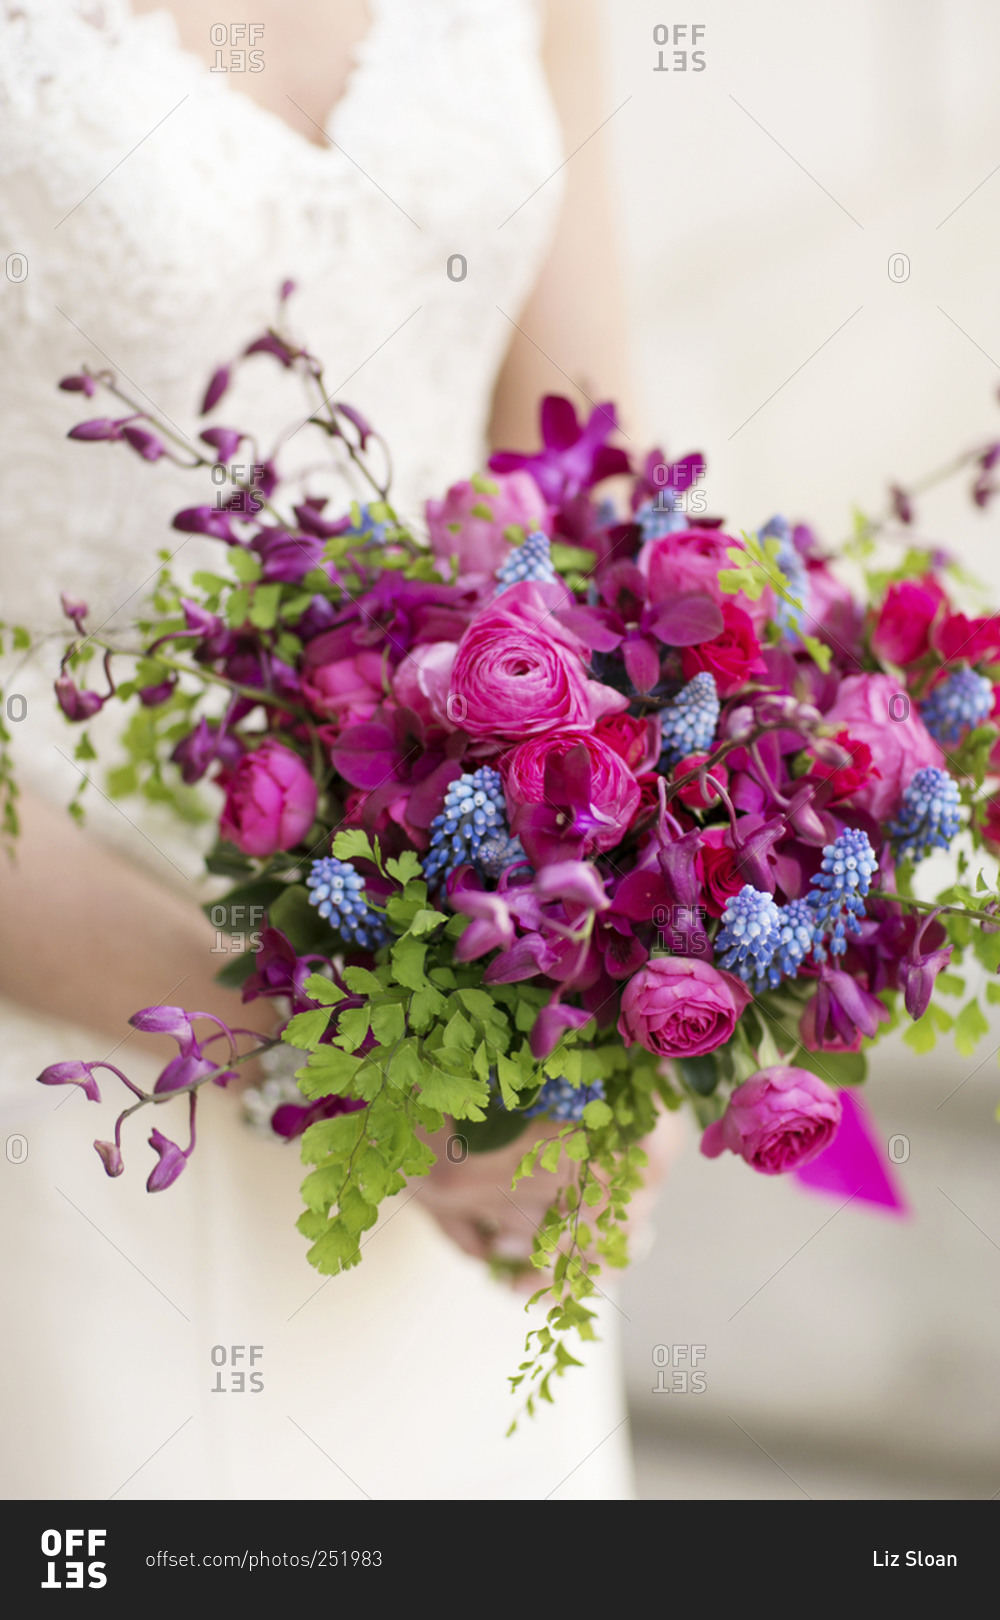 A bride holds her bouquet of bright purple flowers